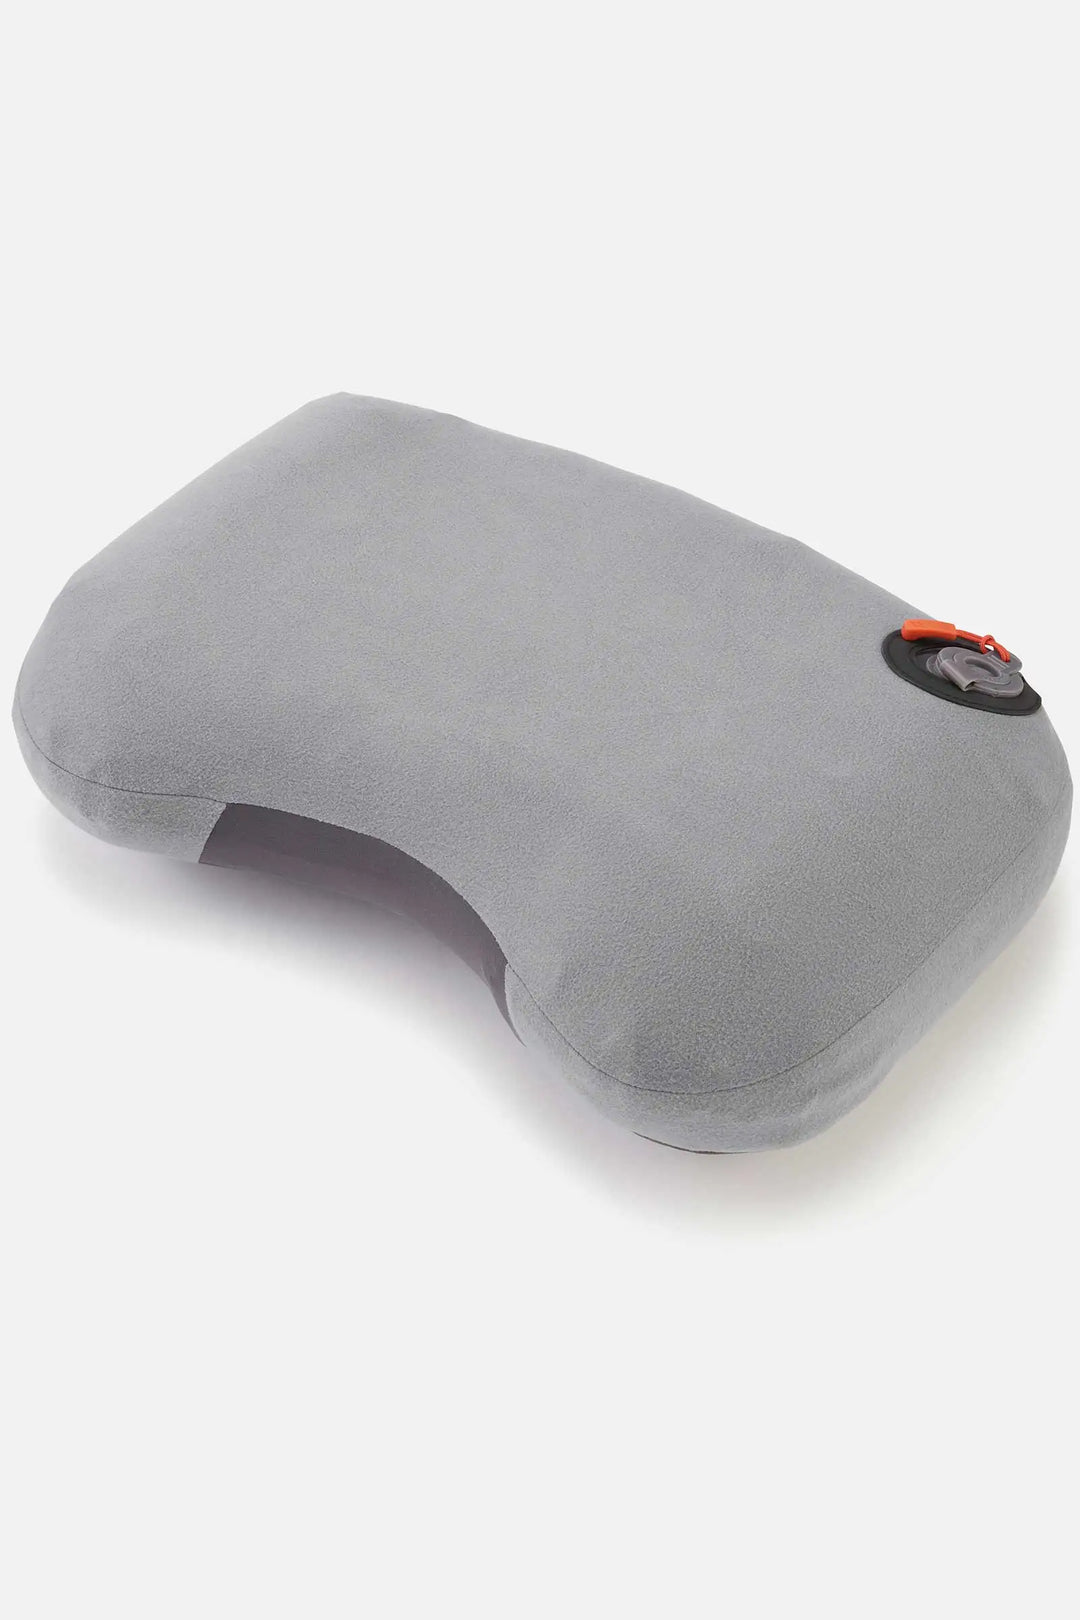 Rab Stratosphere Pillow Inflatable Graphene